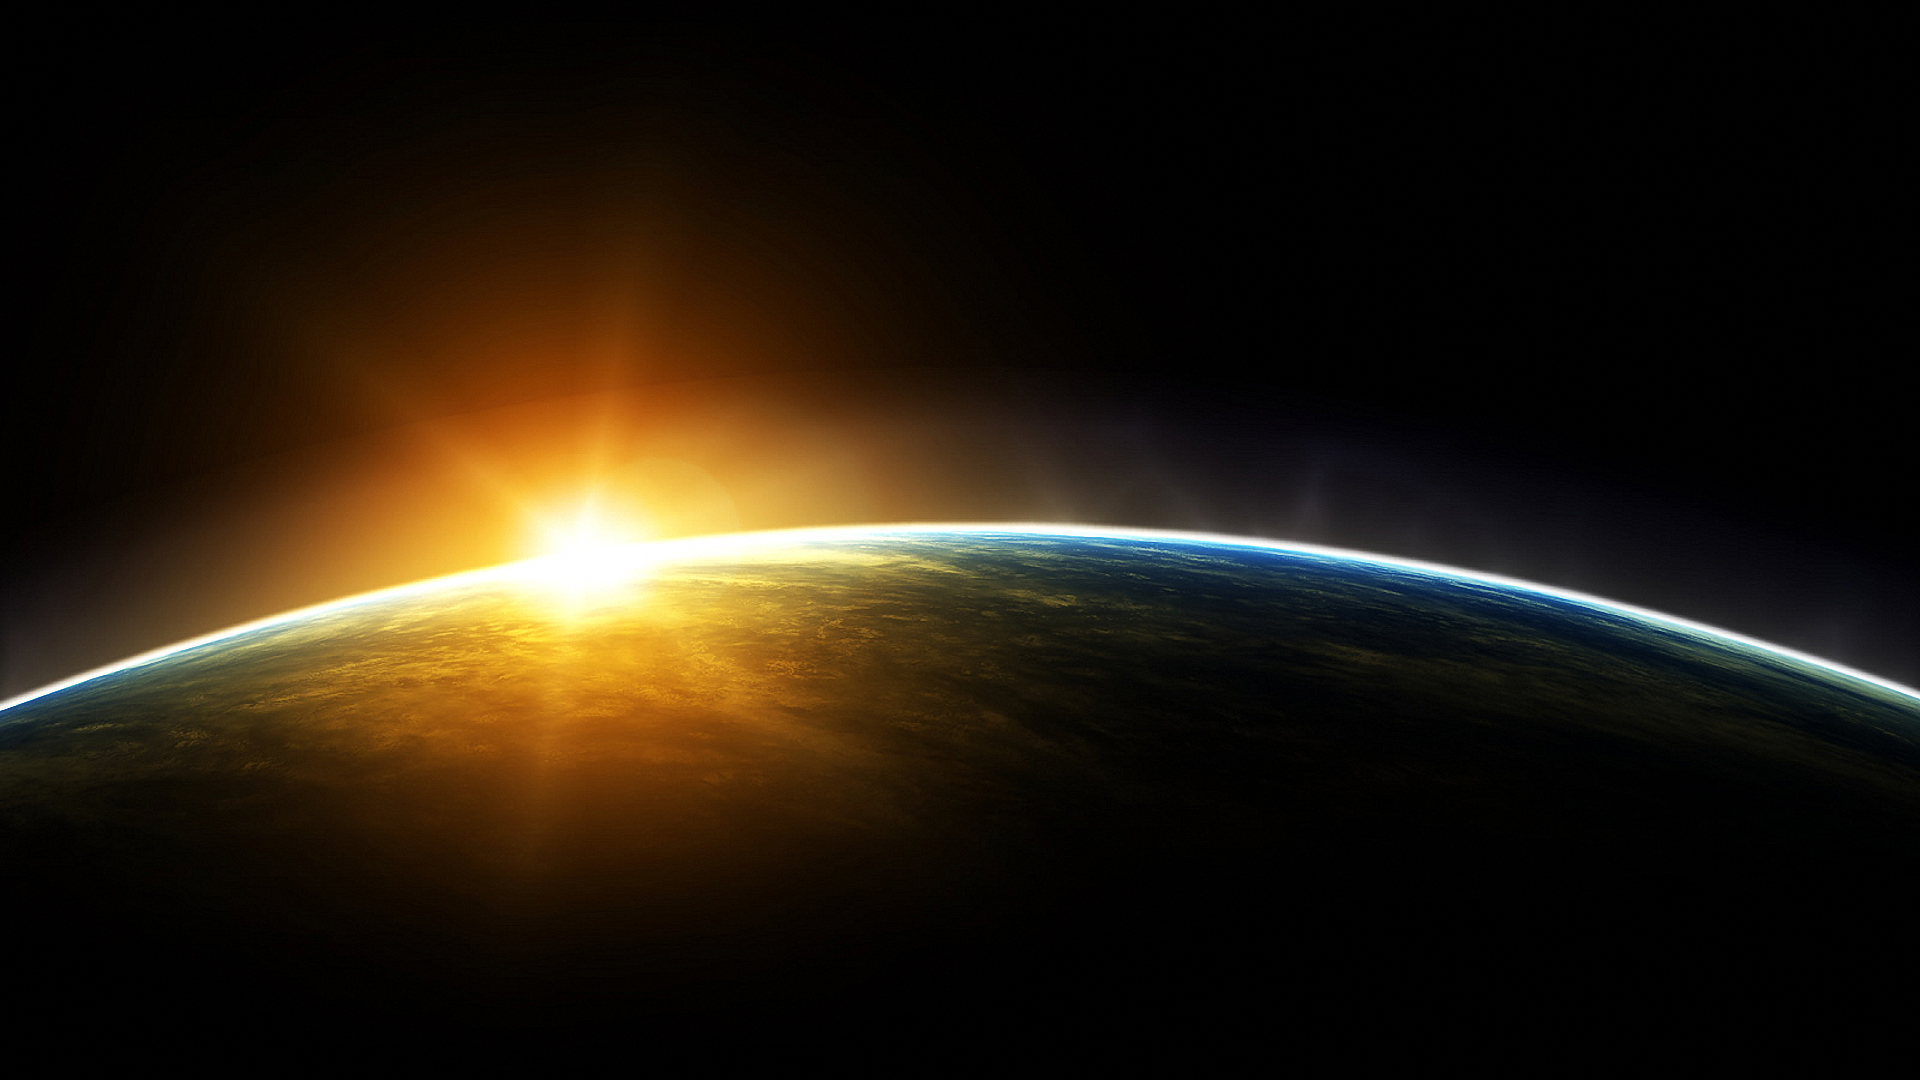 Earth From Space Sunrise - HD Wallpaper 